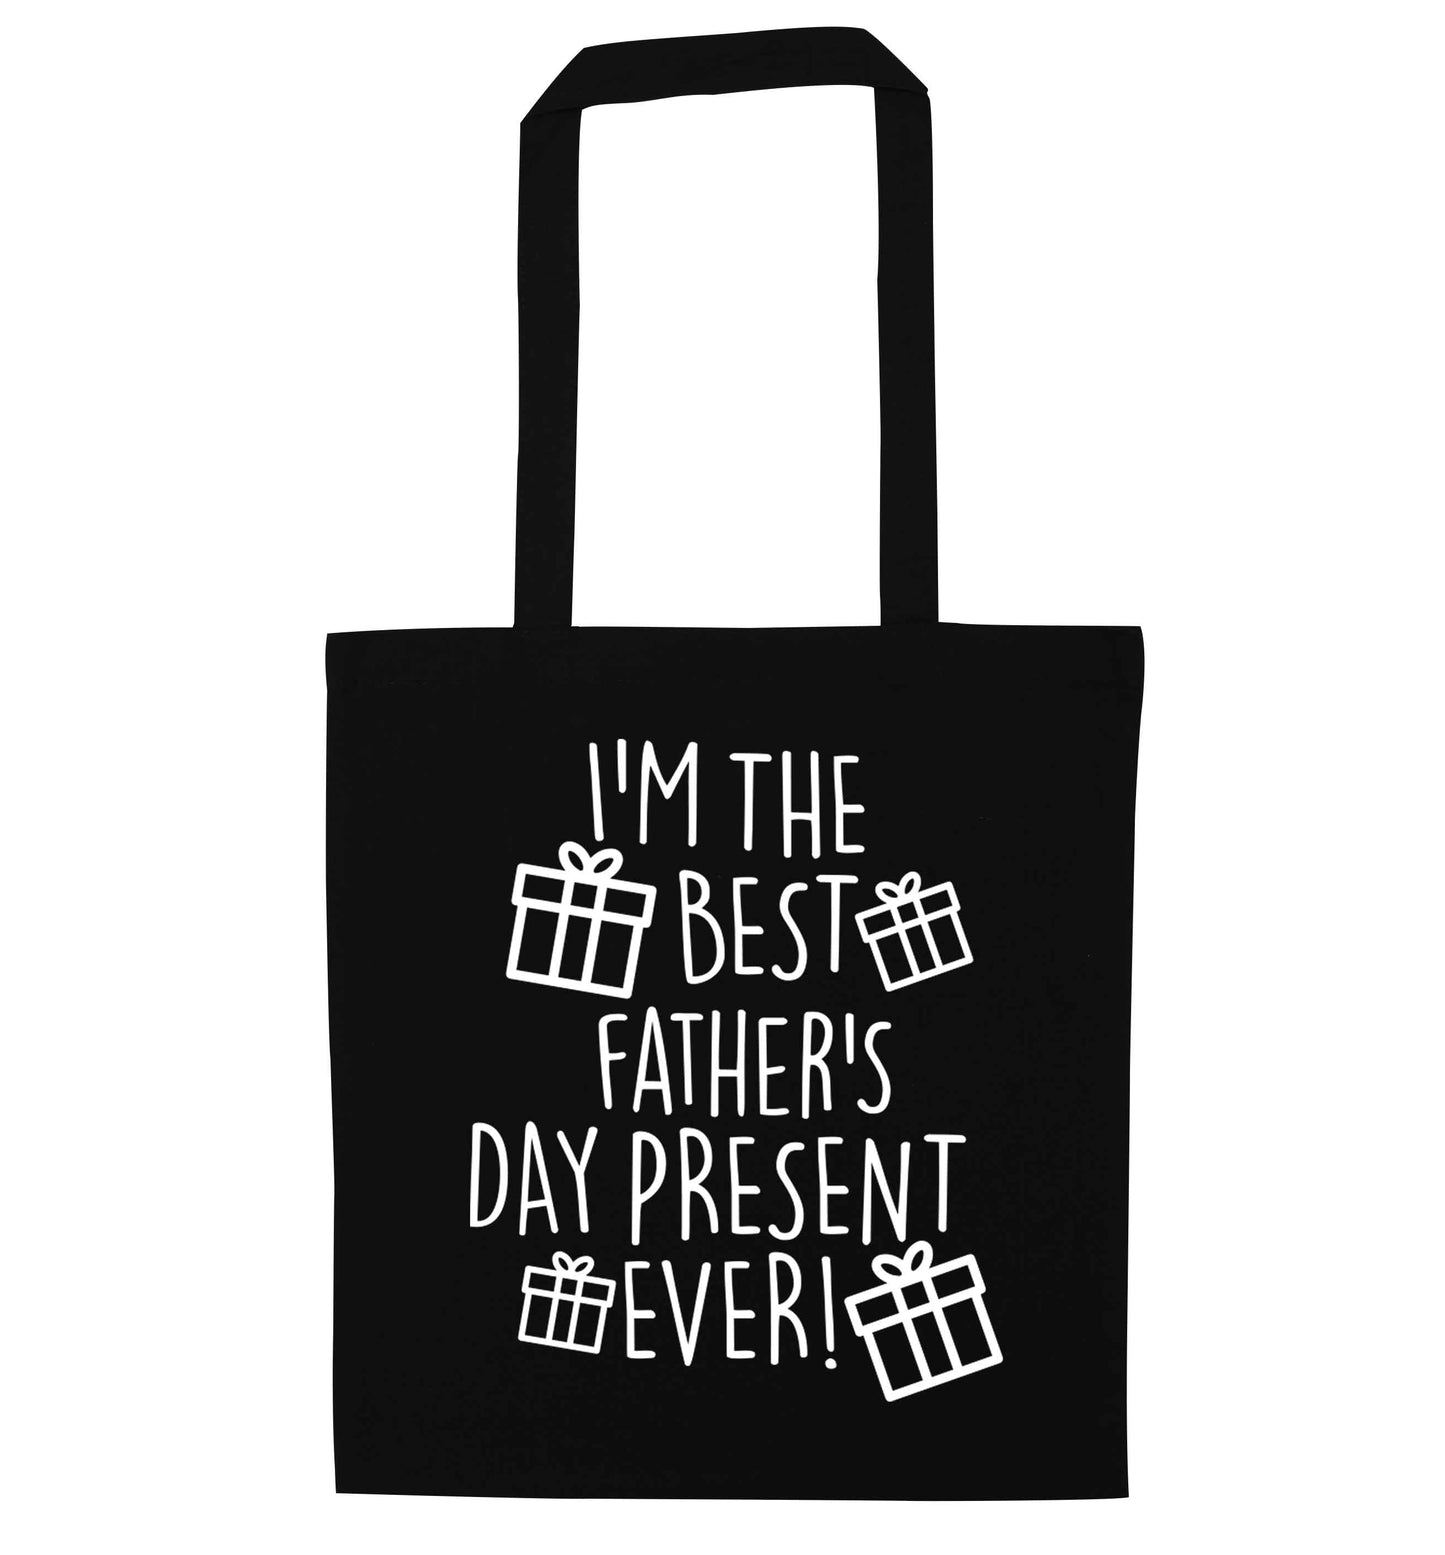 I'm the best father's day present ever!| Tote Bag